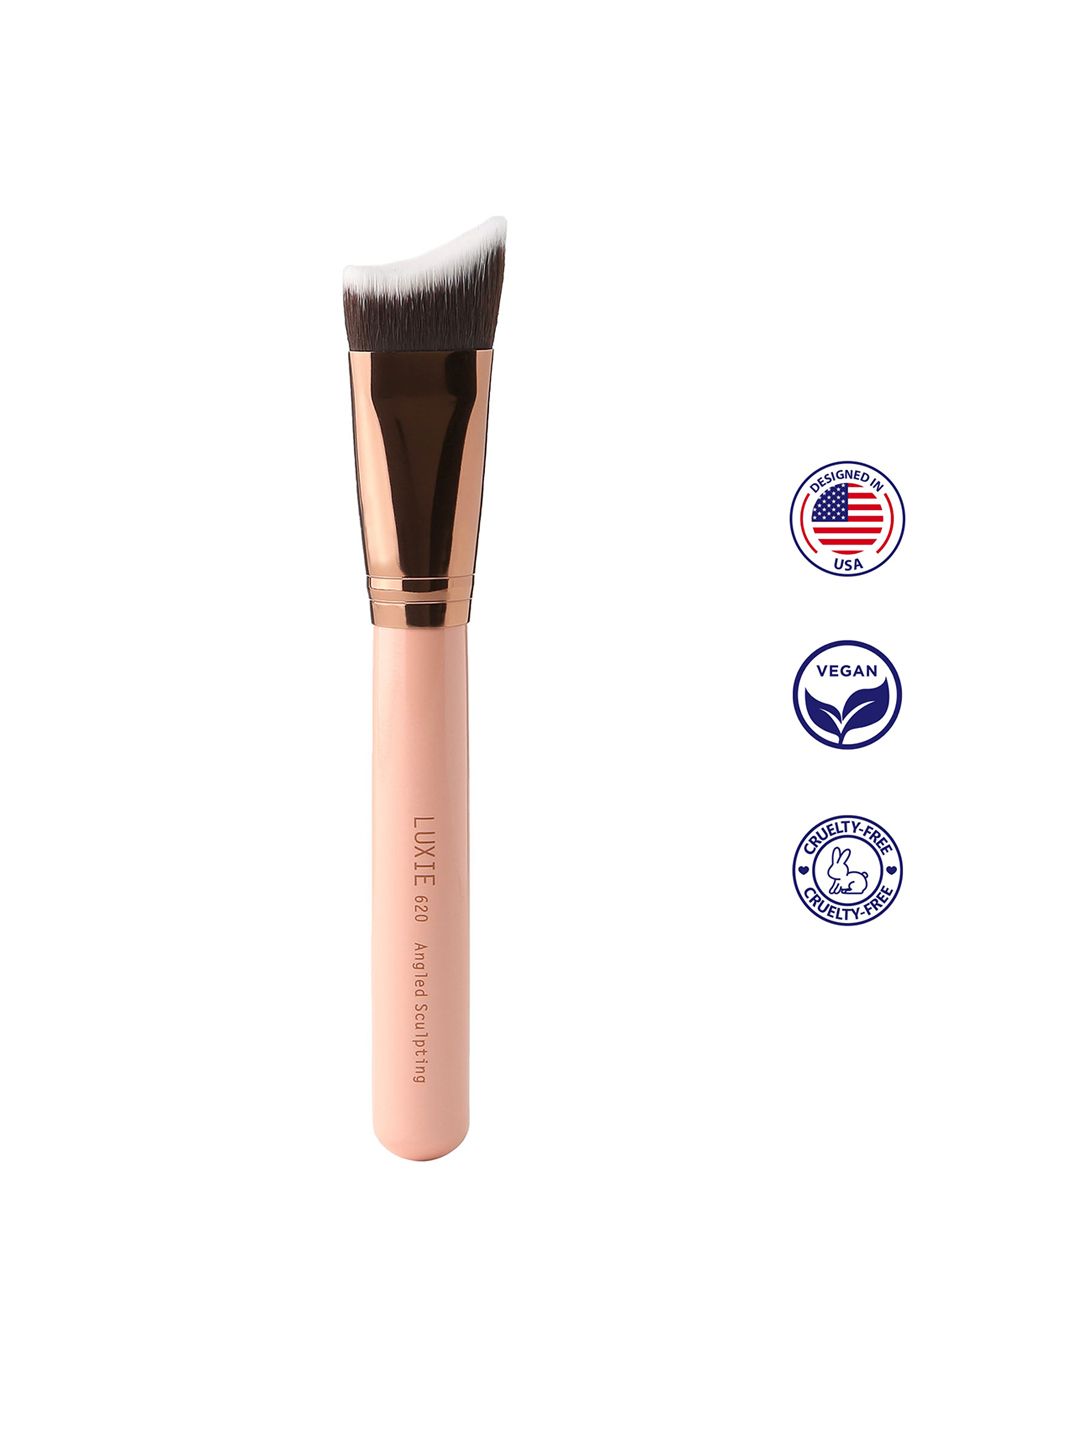 LUXIE Rose Gold Angled Sculpting Brush - 620 Price in India